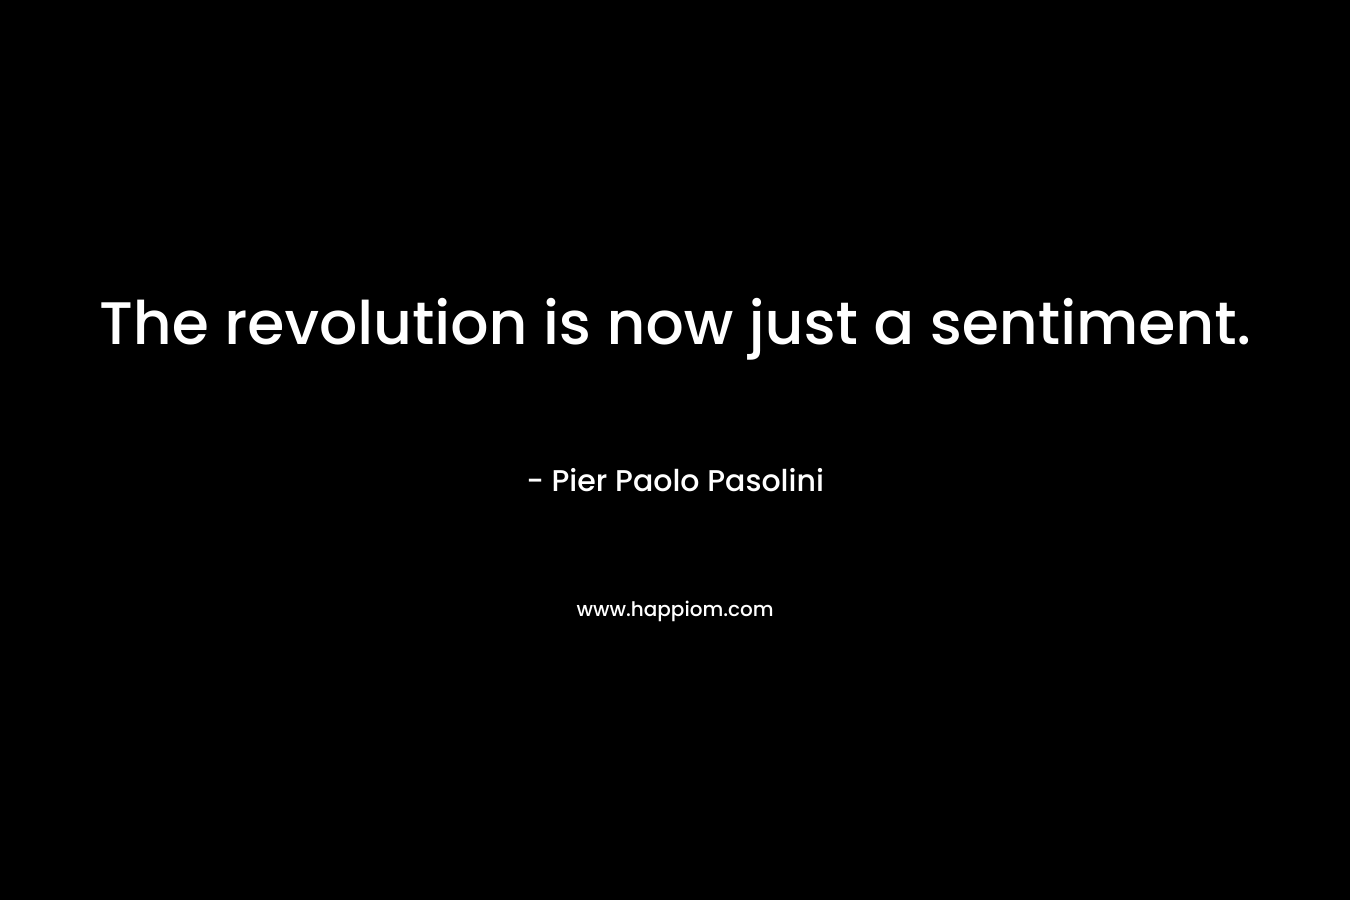 The revolution is now just a sentiment. – Pier Paolo Pasolini